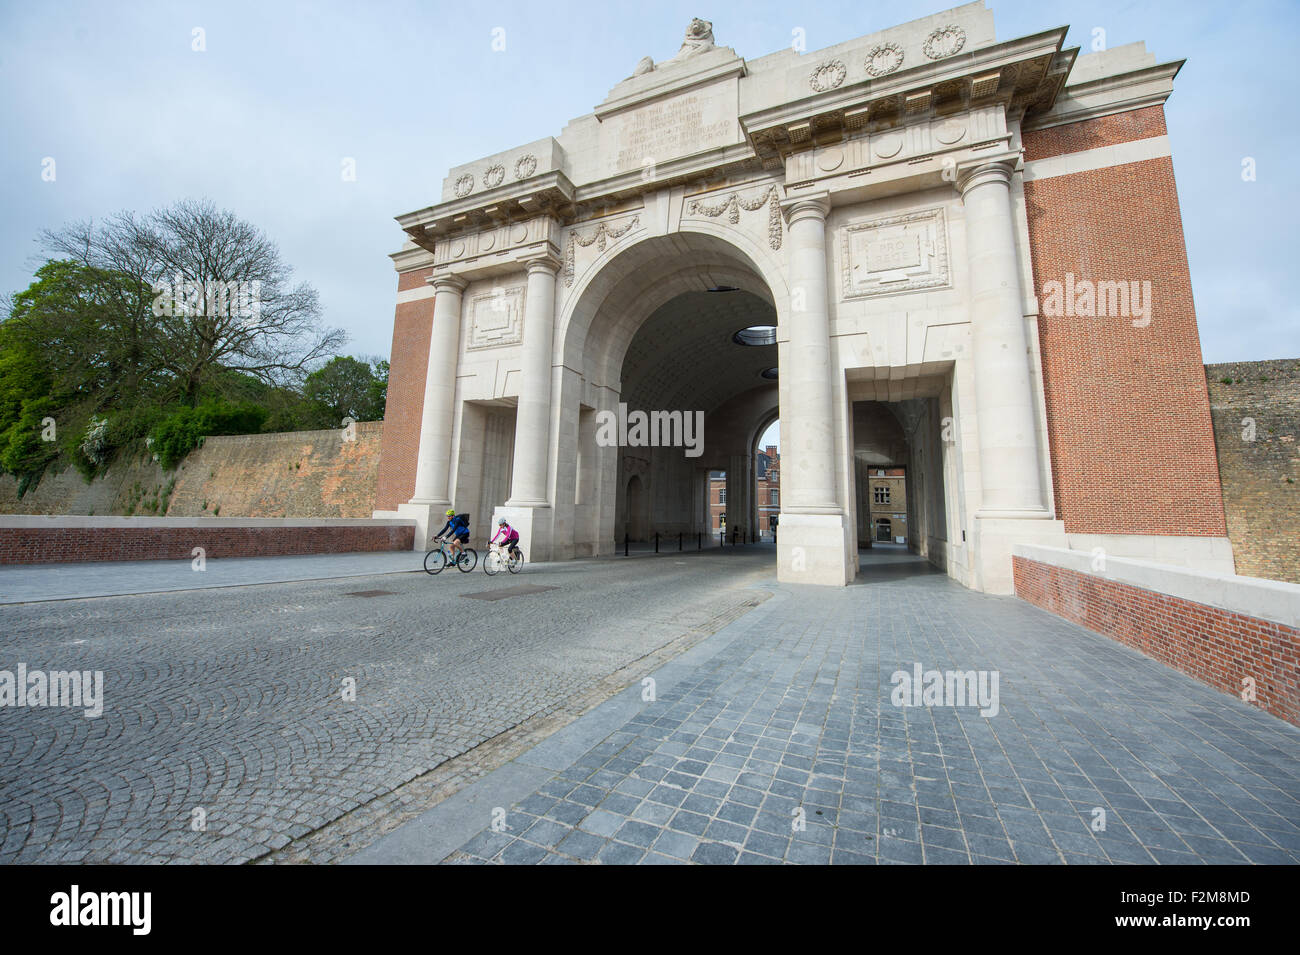 The famous Menin Gate memorial to the First World War dead at Ypres ...